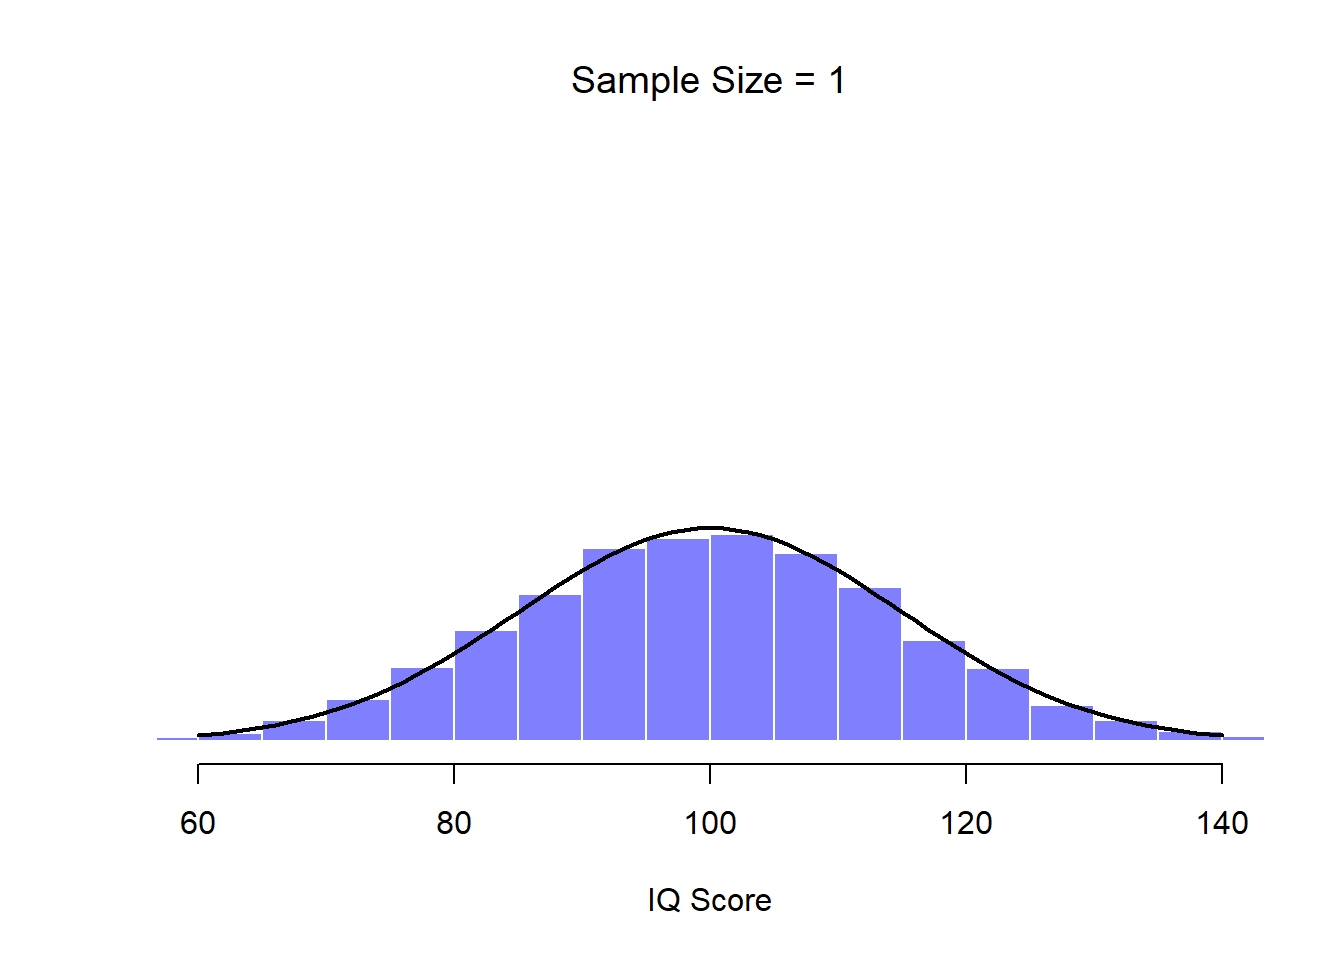 Each data set contained only a single observation, so the mean of each sample is just one person's IQ score. As a consequence, the sampling distribution of the mean is of course identical to the population distribution of IQ scores.